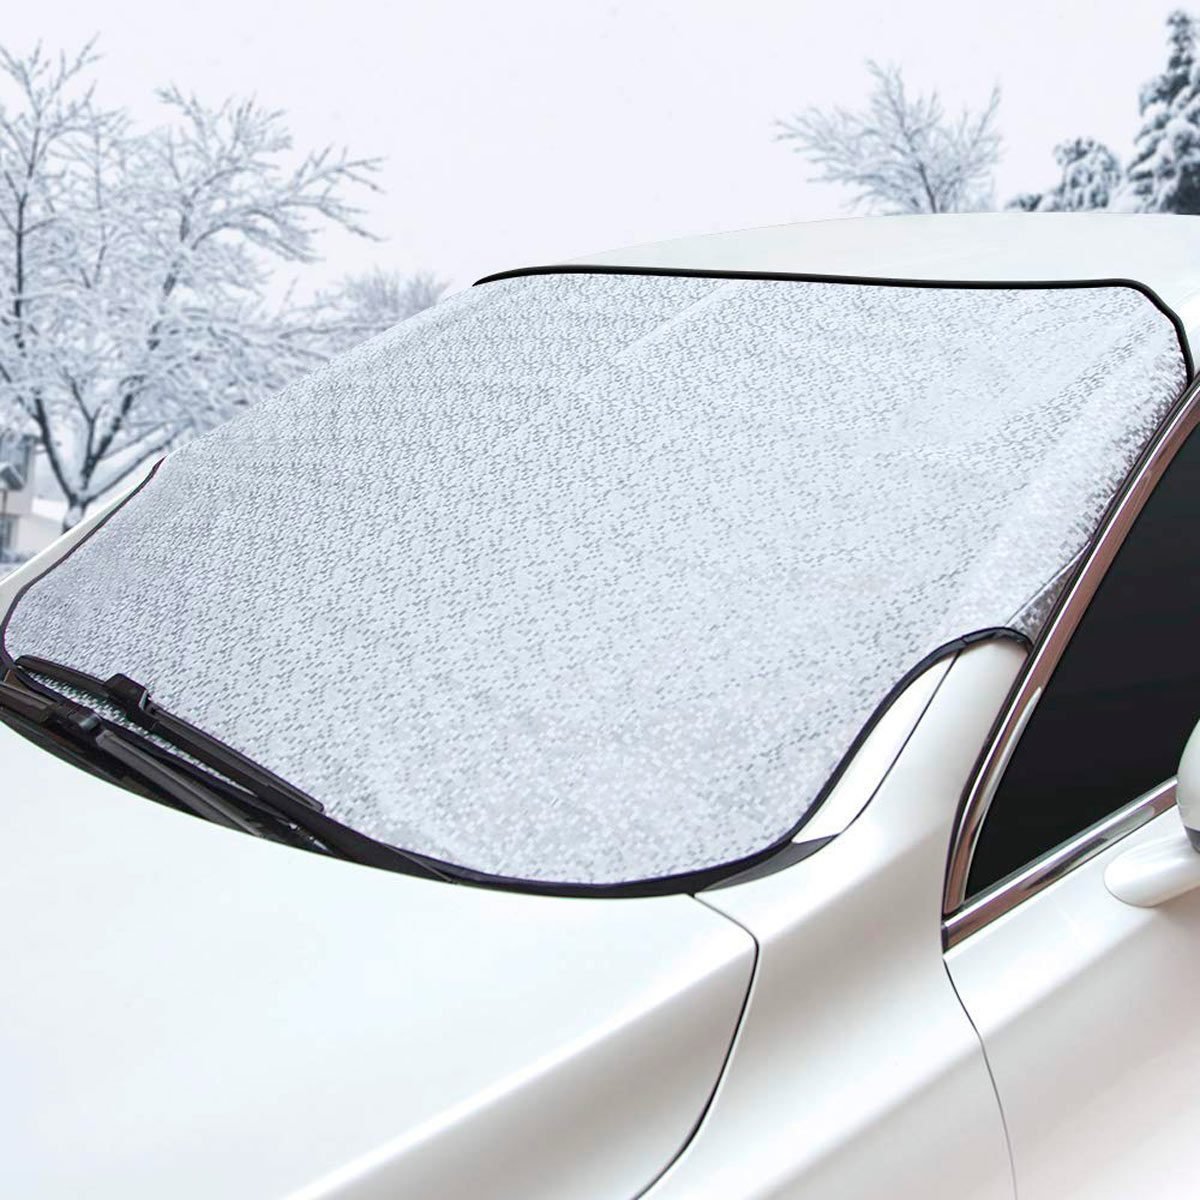 Winter Front Shield Car Windscreen Frost Cover Ice Snow Front Window Protection 